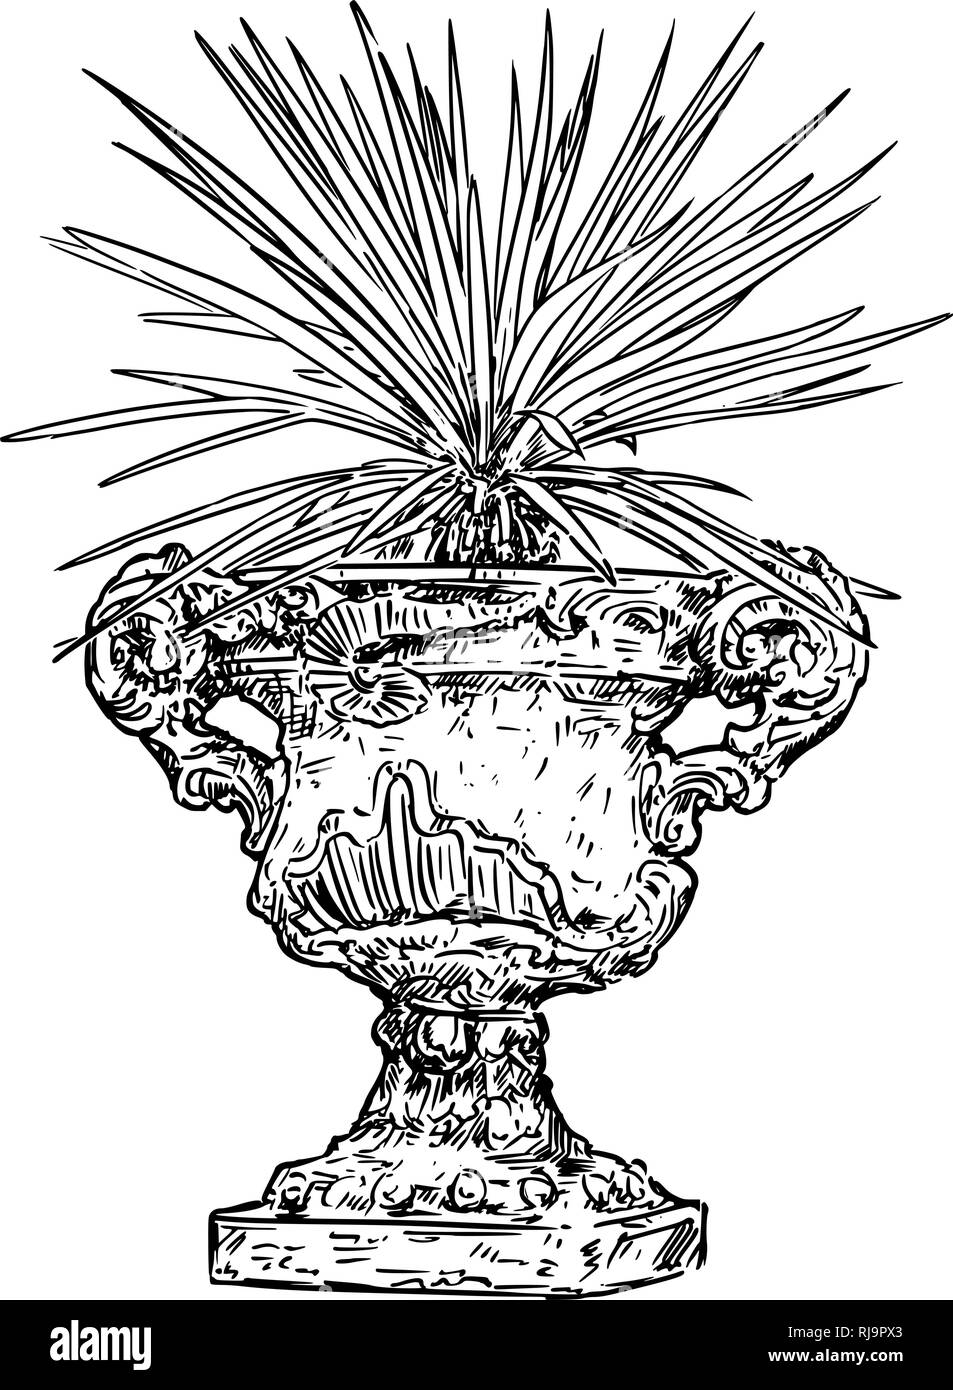 Drawing of Old Antique Ornamental Stone Goblet or Vase With Yucca Plant Stock Vector